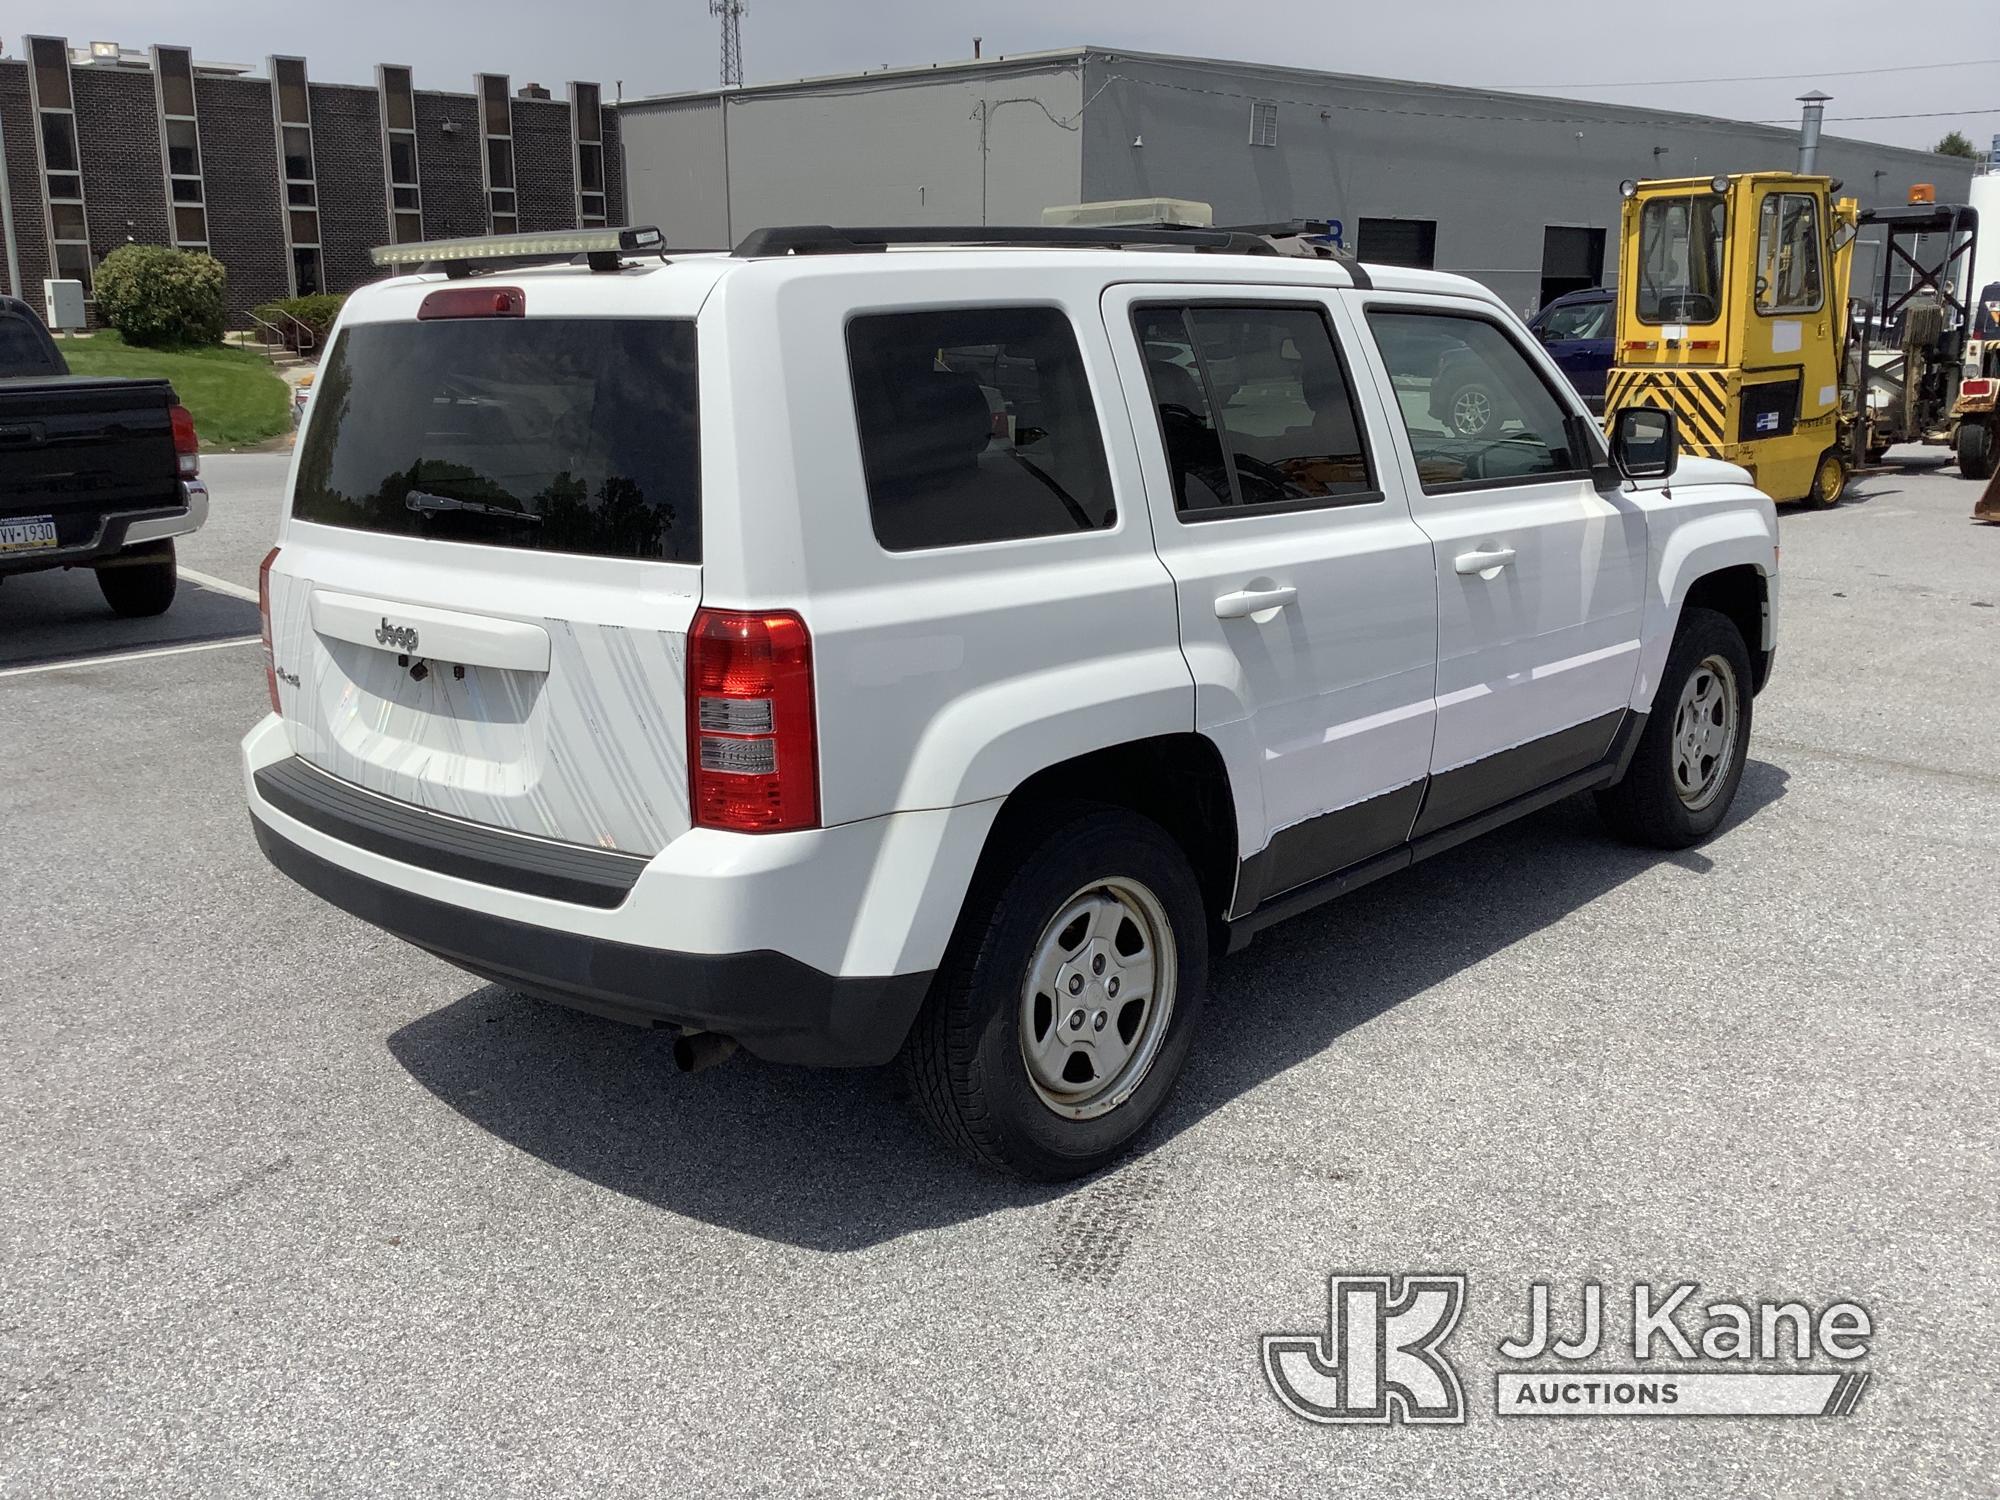 (Chester Springs, PA) 2016 Jeep Patriot 4x4 4-Door Sport Utility Vehicle Runs & Moves, Body & Rust D